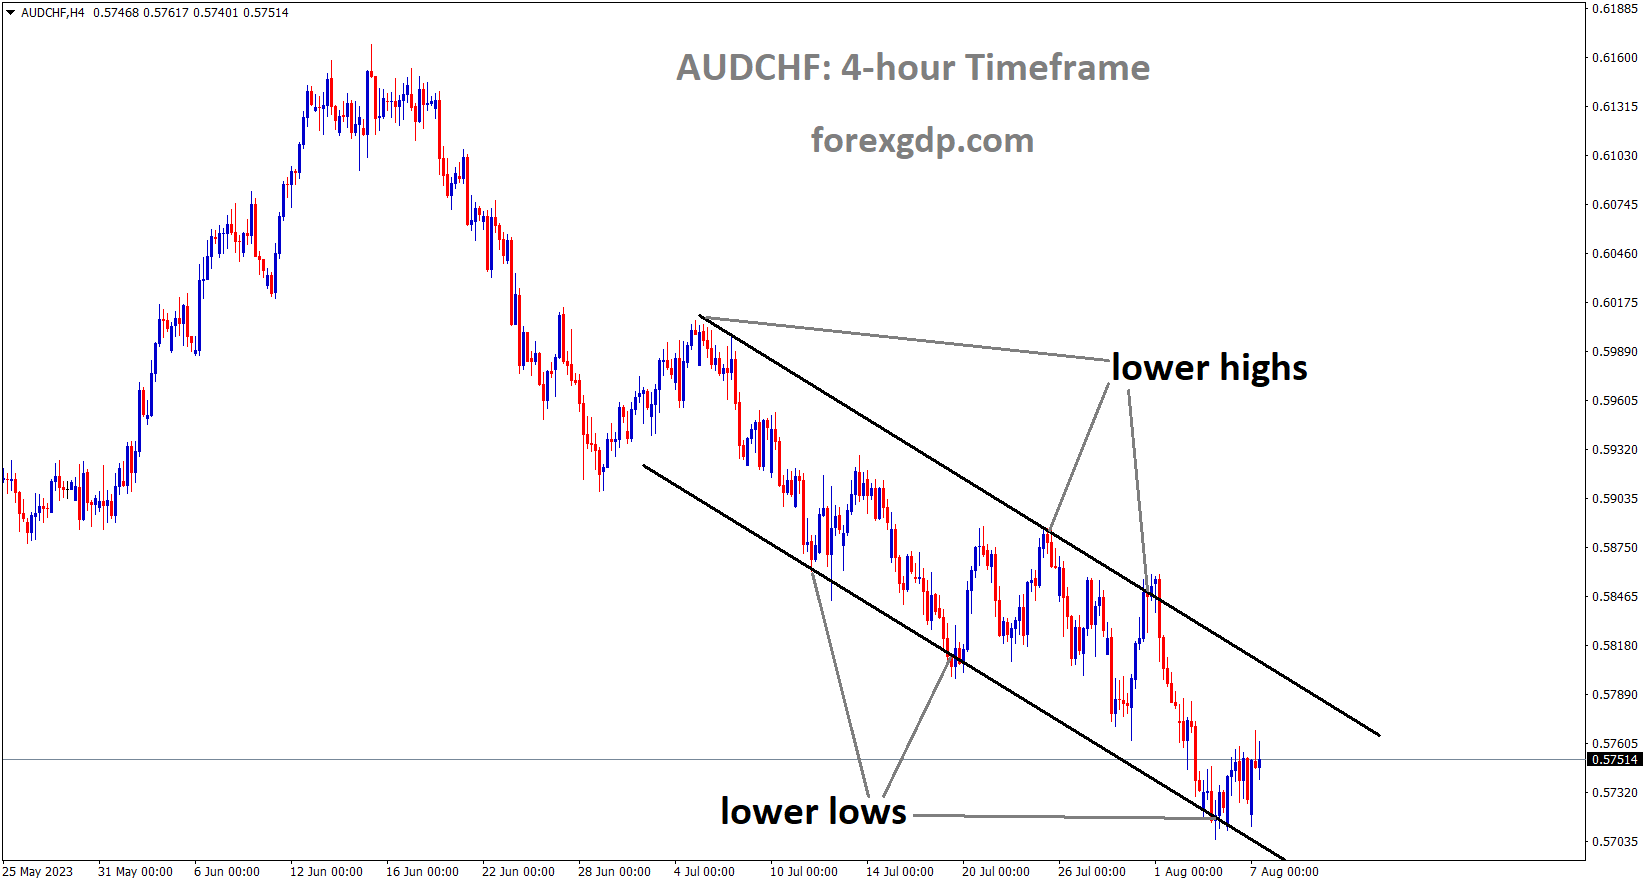 AUDCHF is moving in the Descending channel and the market has rebounded from the lower low area of the channel